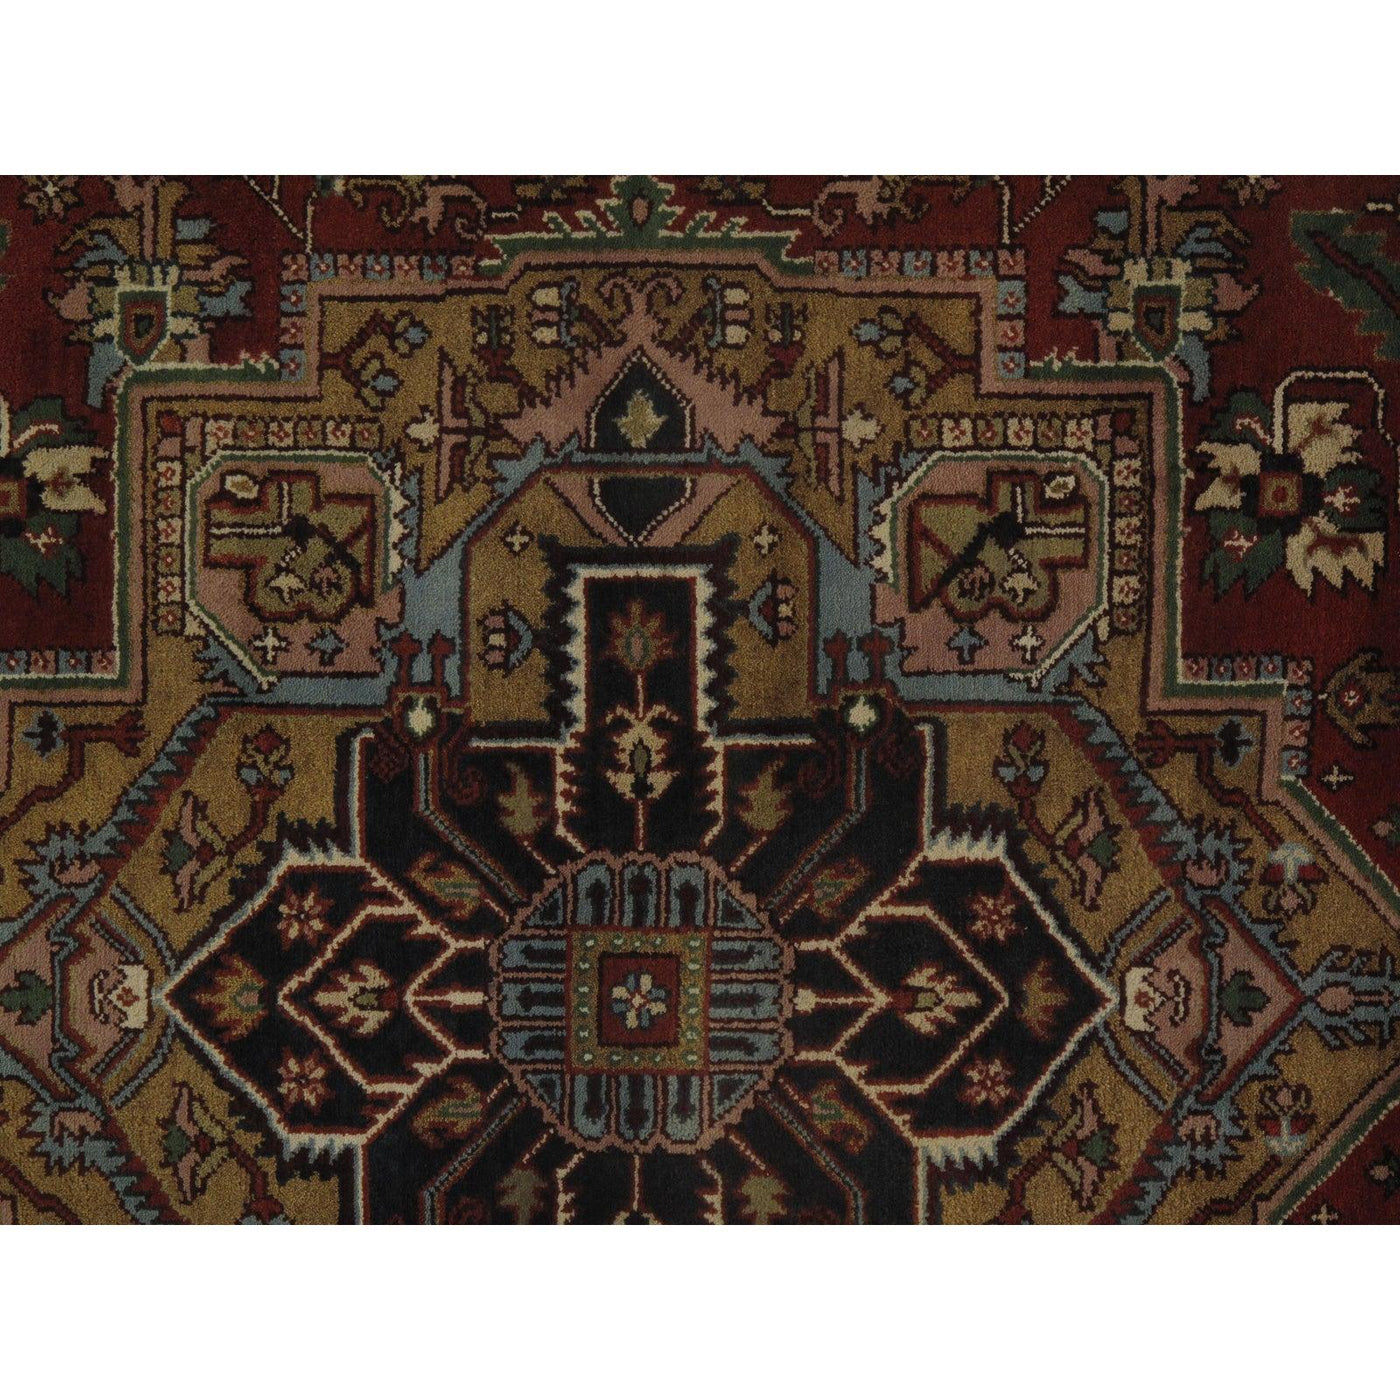 Canvello Serapi Design Hand-Knotted Rug - 8'9" X 11'10" - Canvello